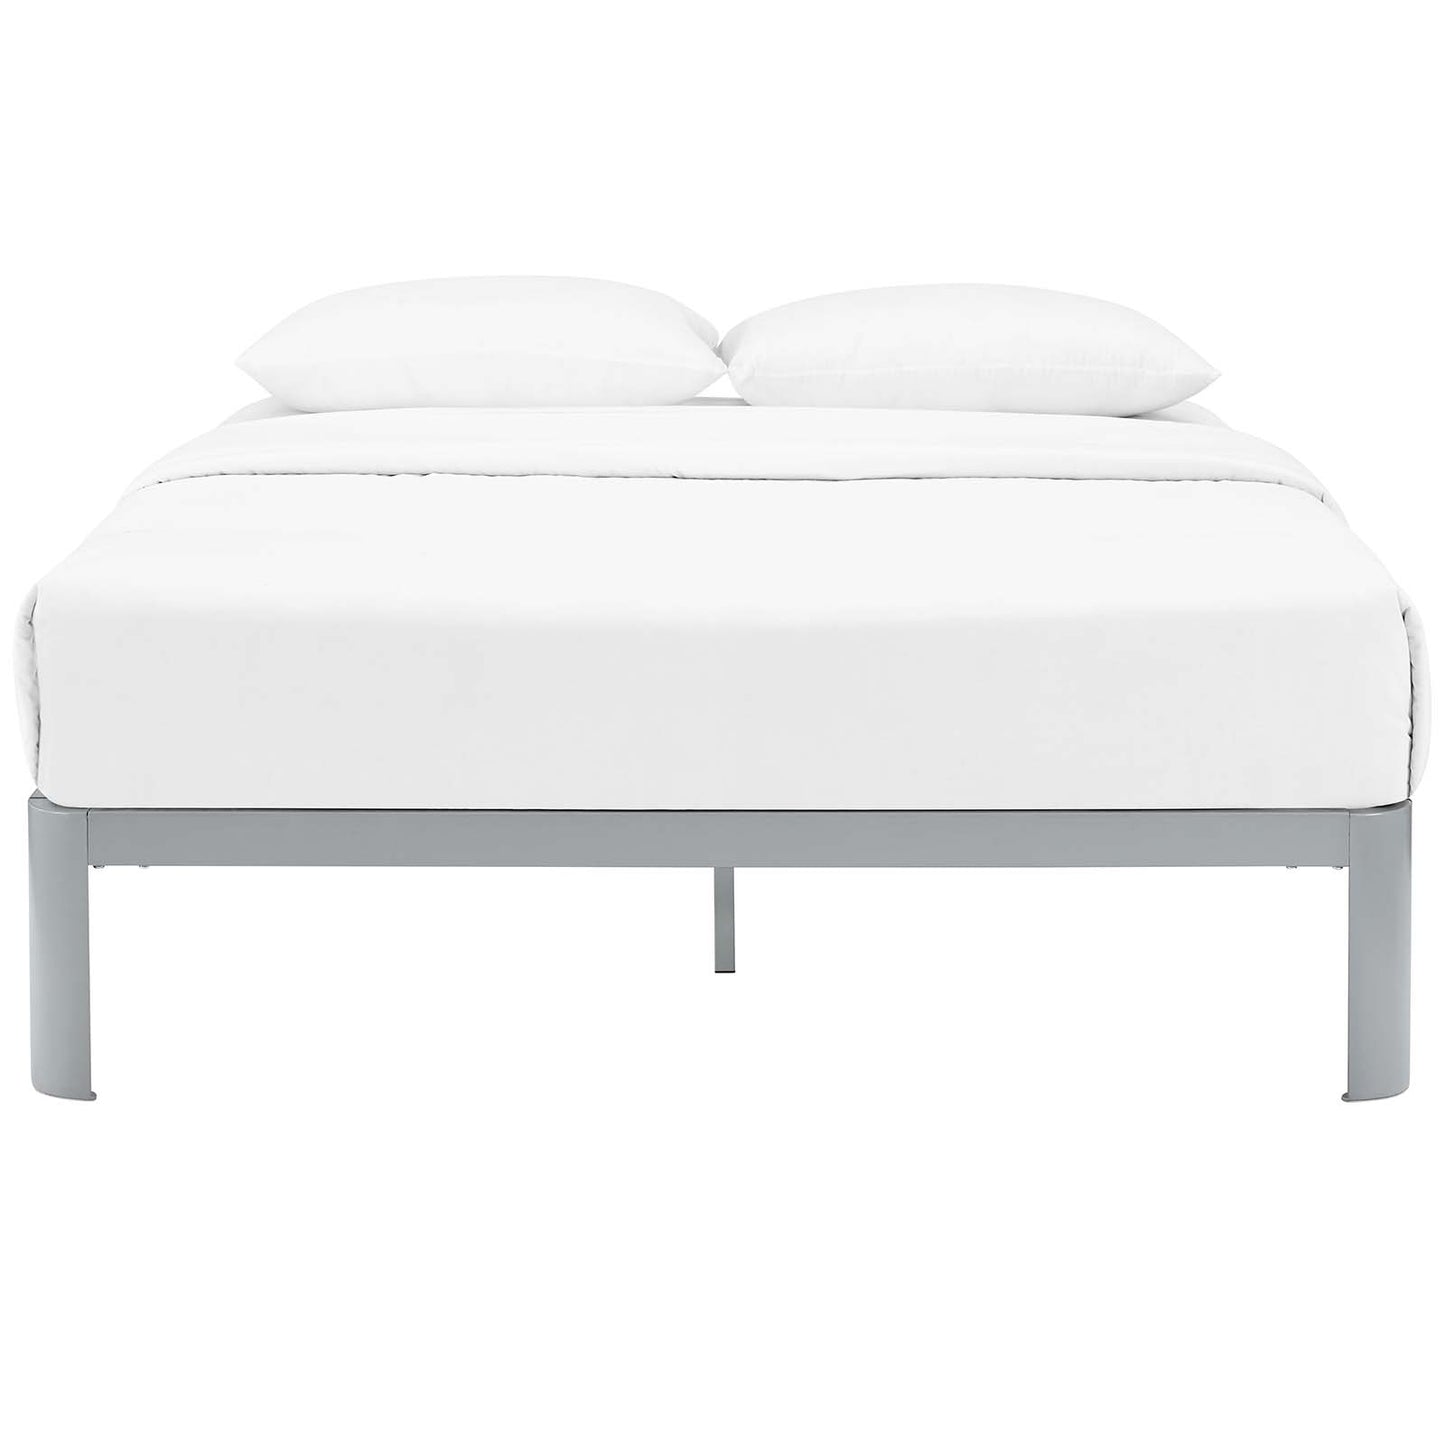 Corinne King Bed Frame By Modway - MOD-5470